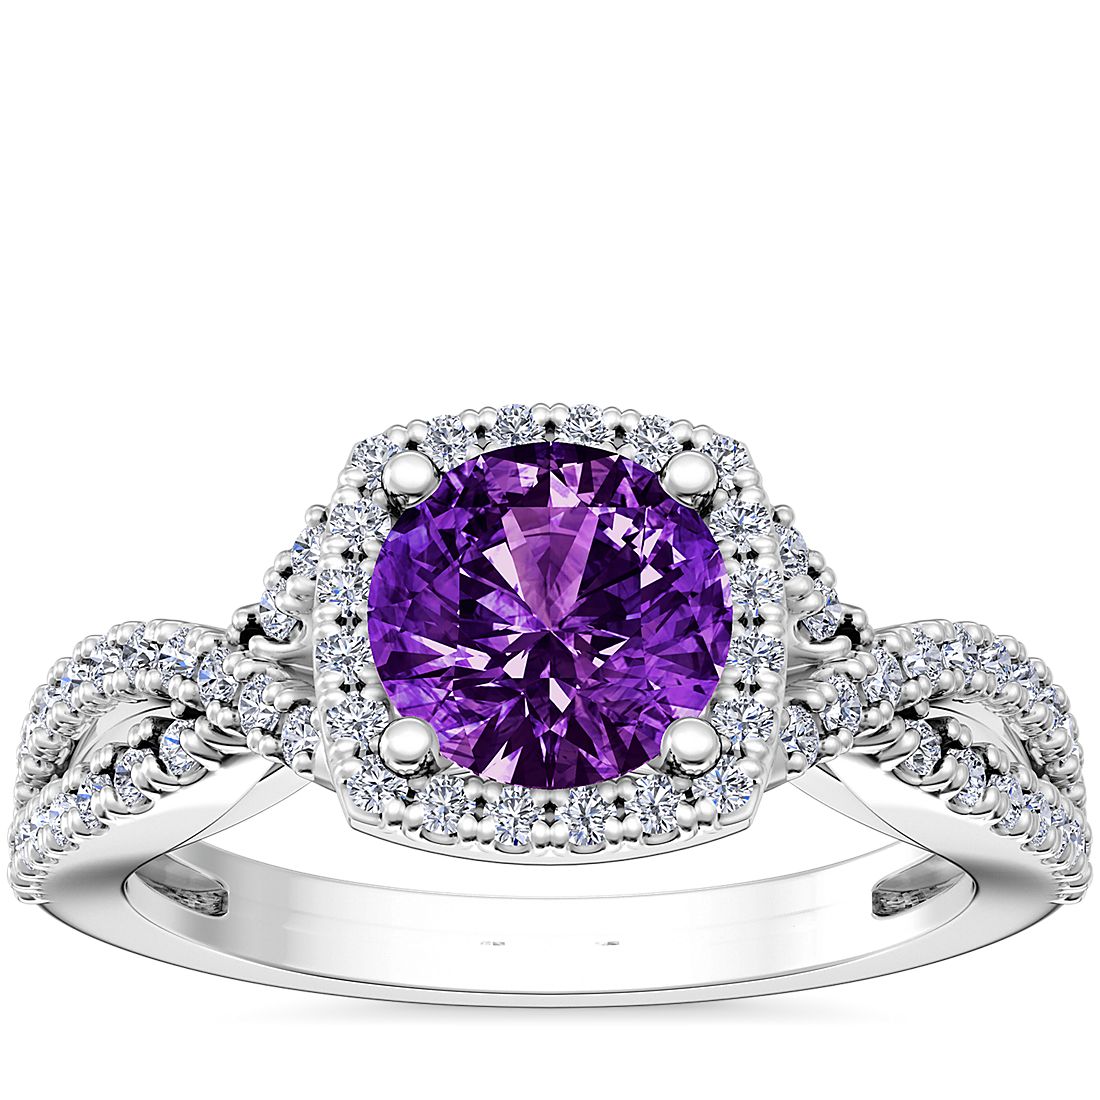 Twist Halo Diamond Engagement Ring with Round Amethyst in 14k White Gold (8mm)